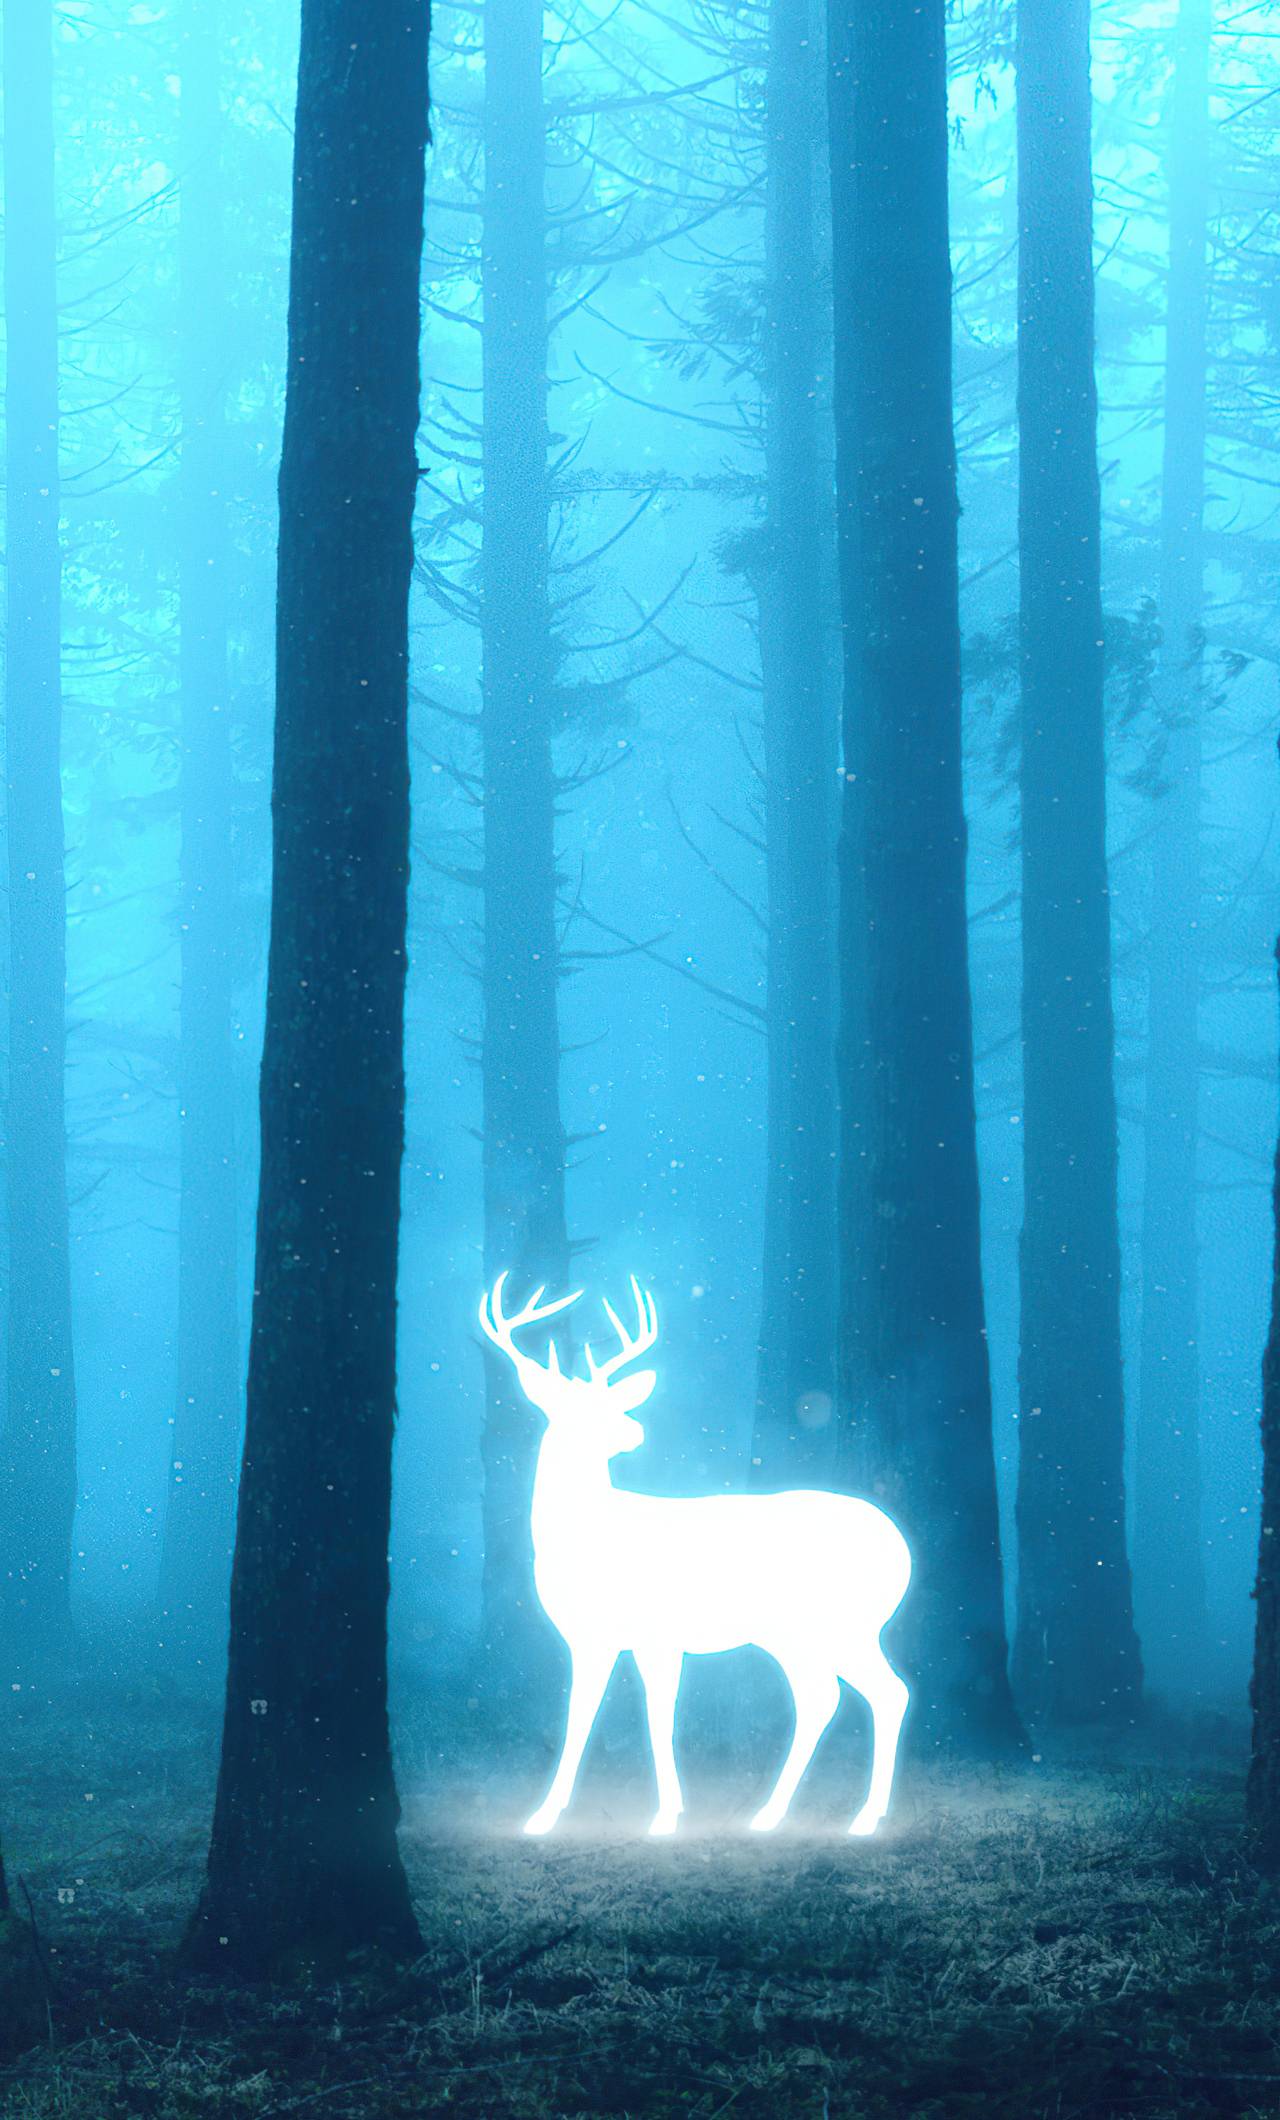 A white deer in the forest wallpaper - Deer